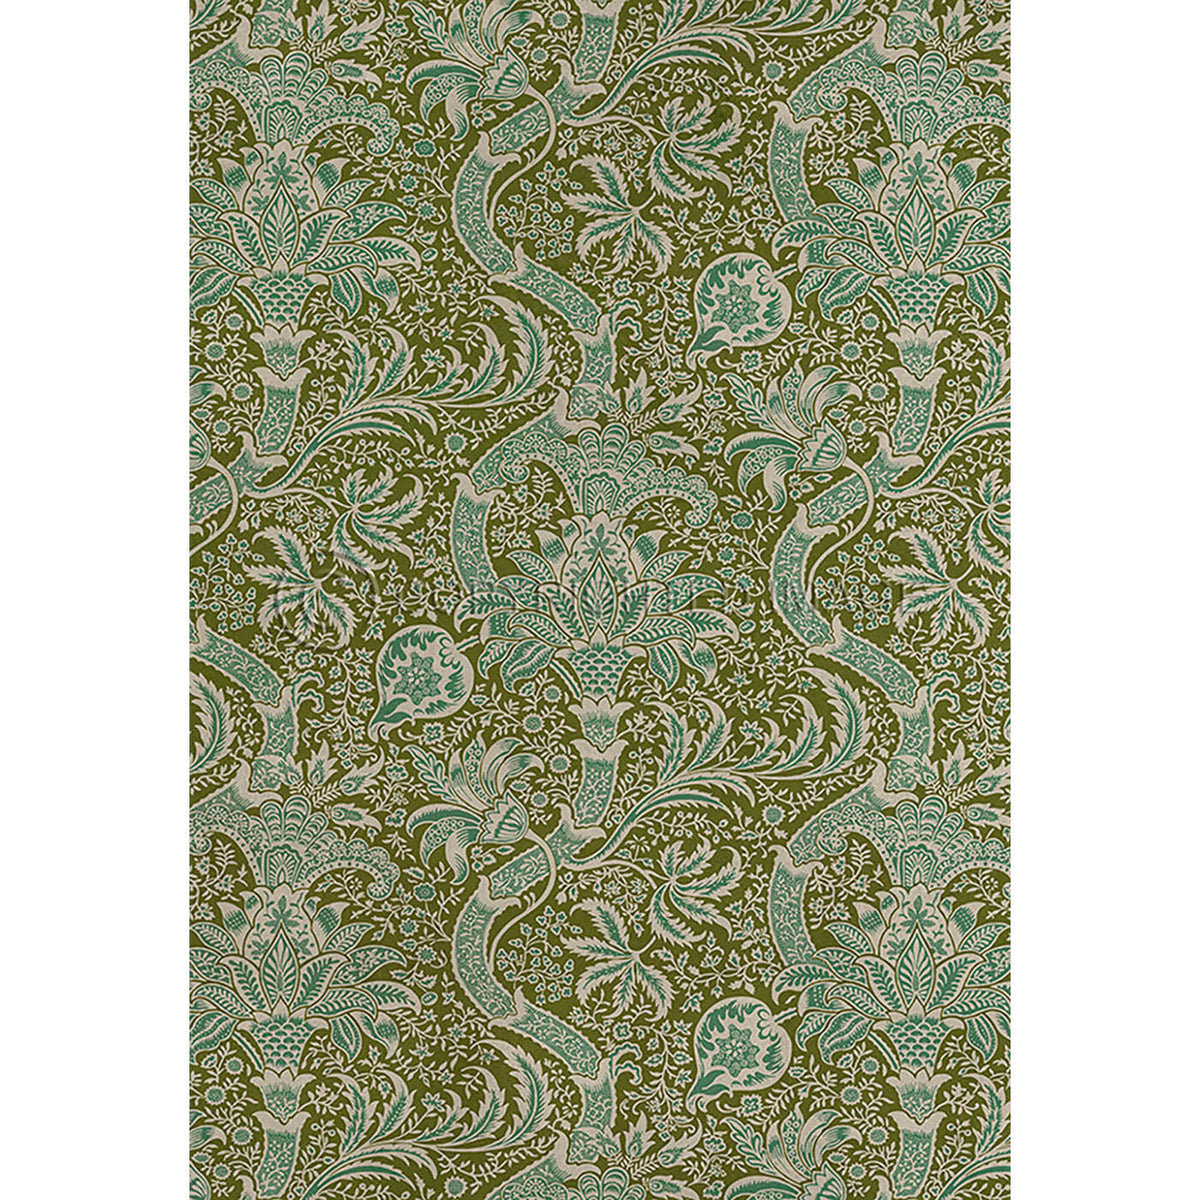 Indian Olive and Teal 52x76